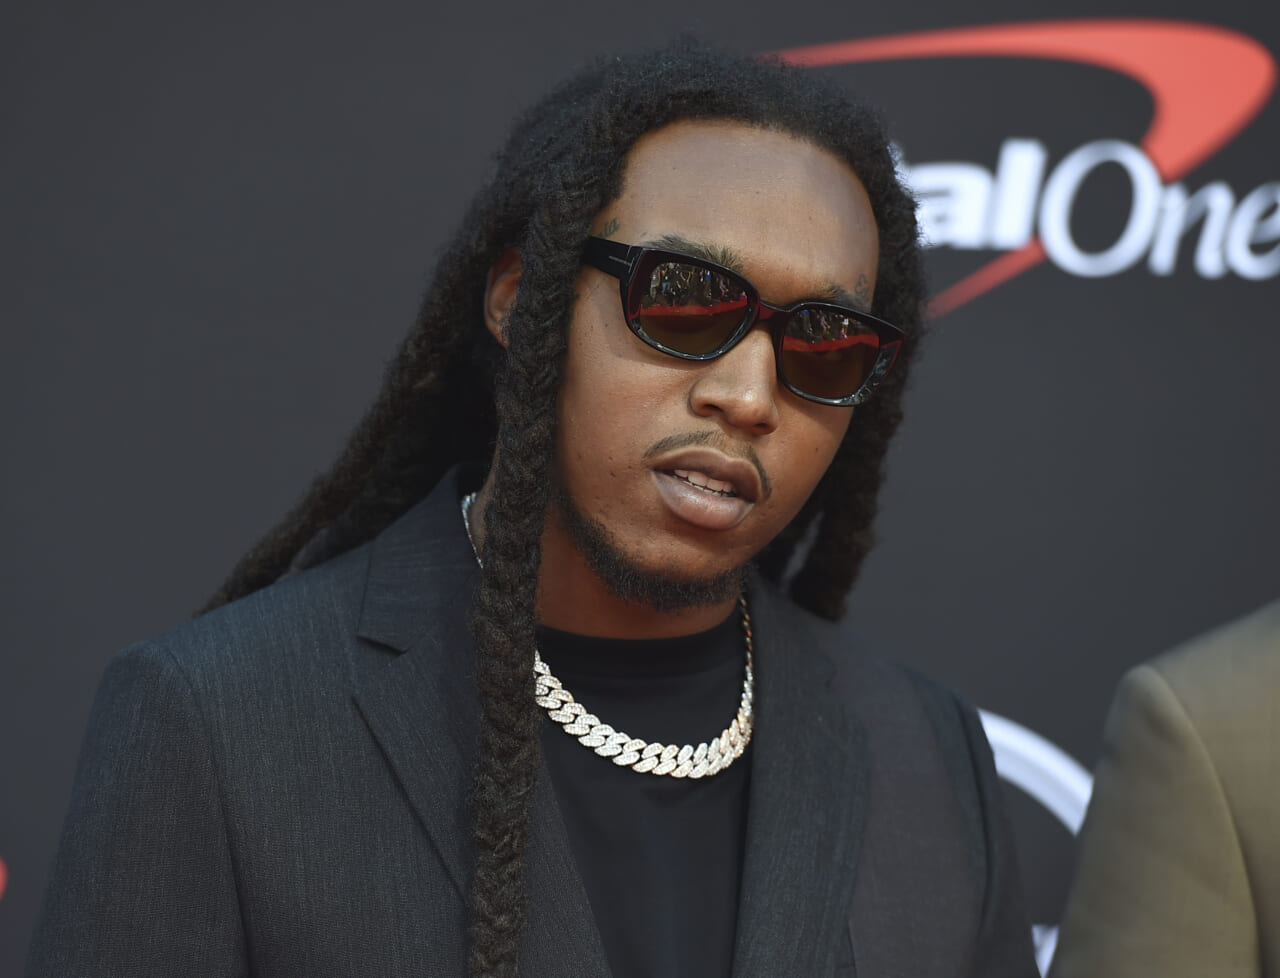 Quavo to perform in Grammys tribute to Takeoff